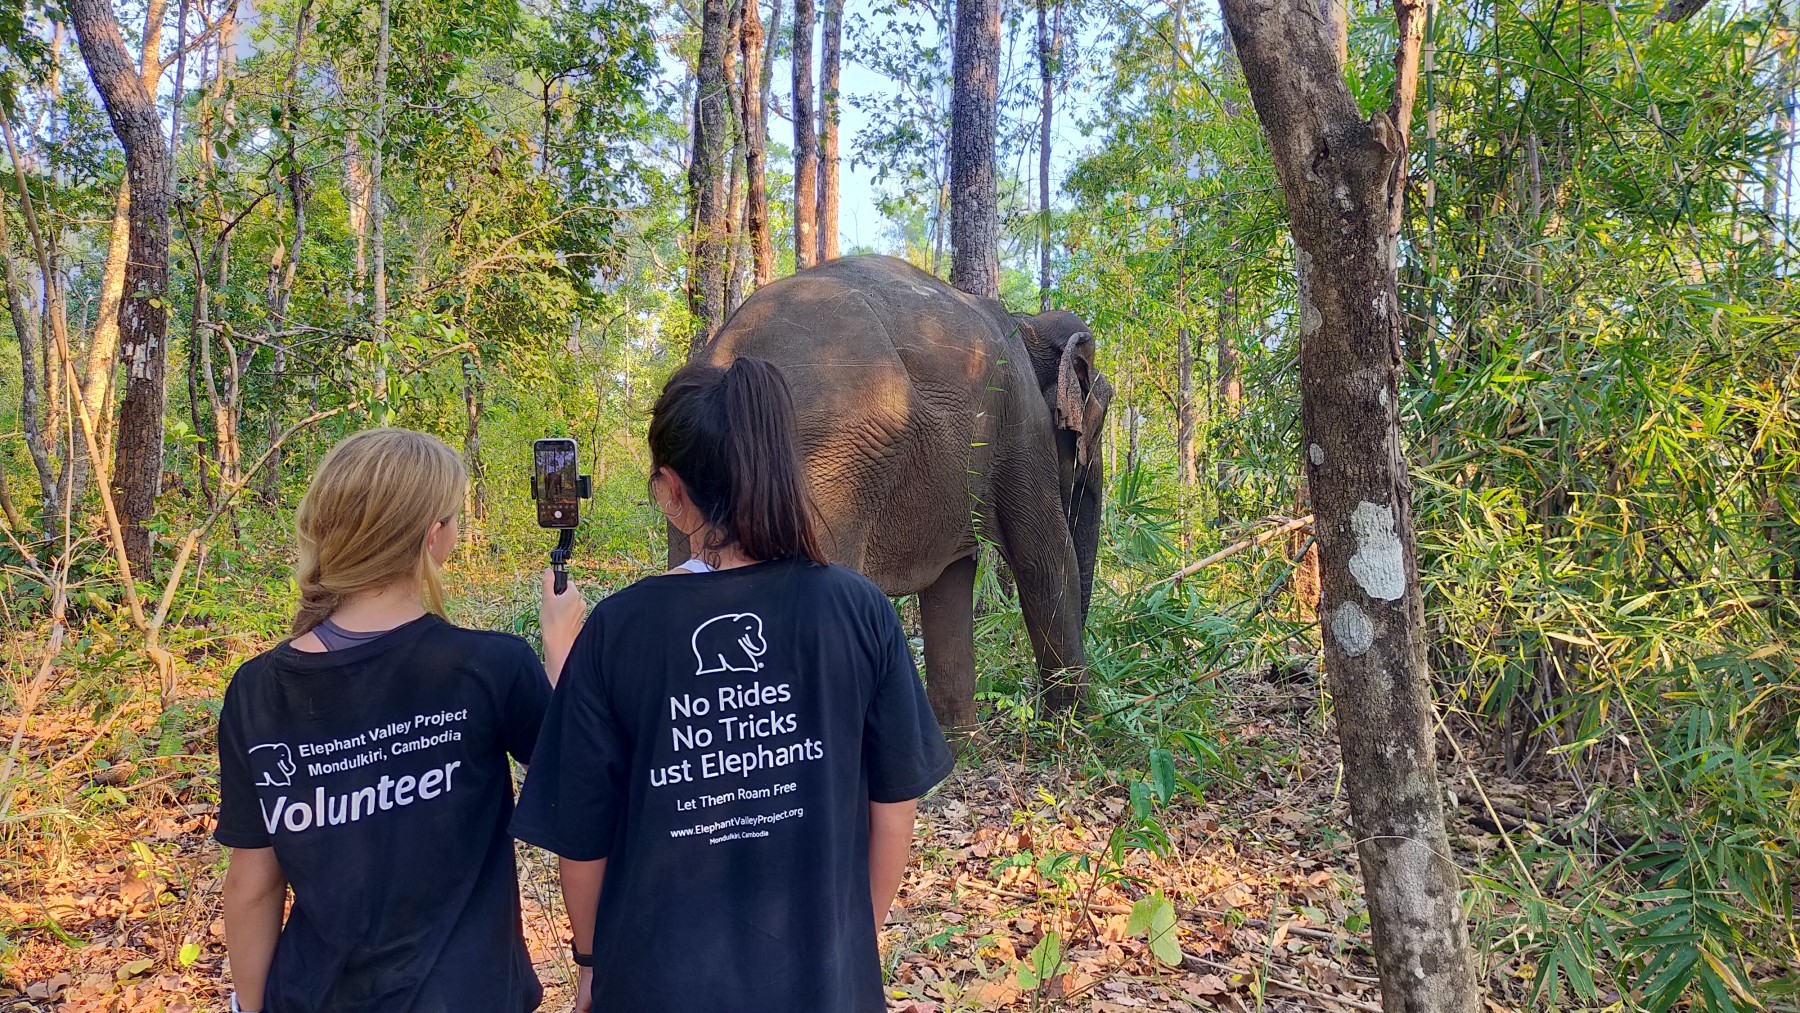 Volunteers at Elephant Valley Project in Cambodia with an elephant in the background